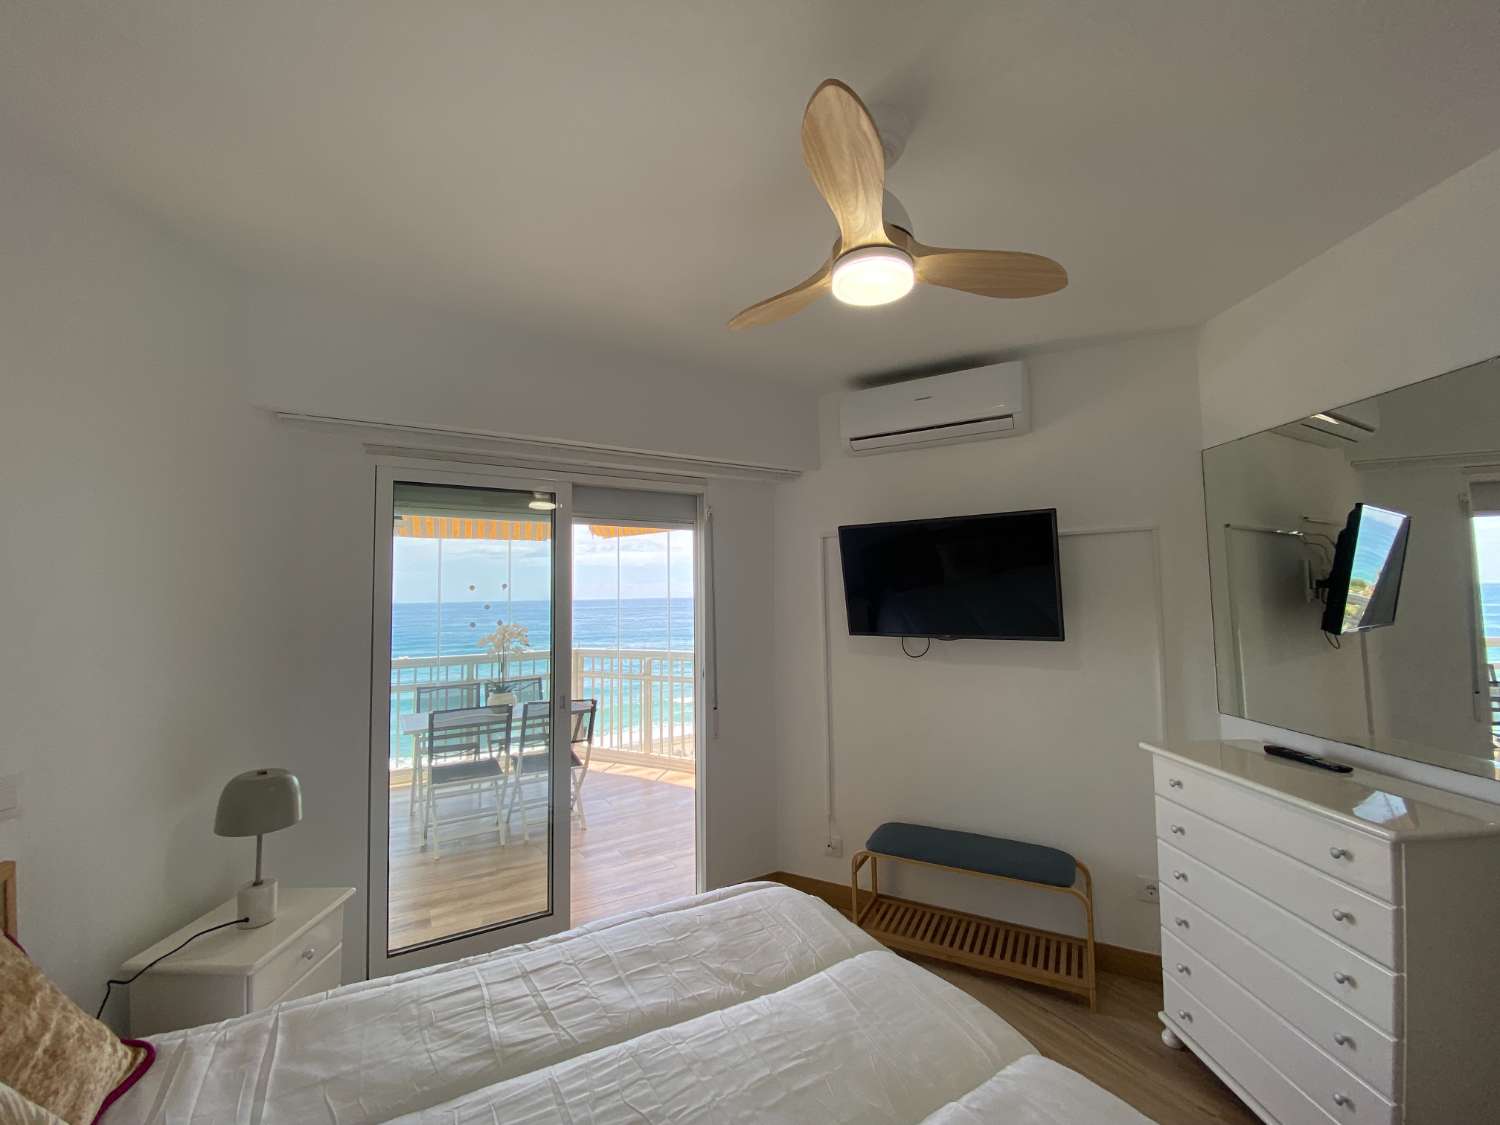 Incredible renovated apartment with panoramic sea views: The perfect home for beach lovers!&quot;